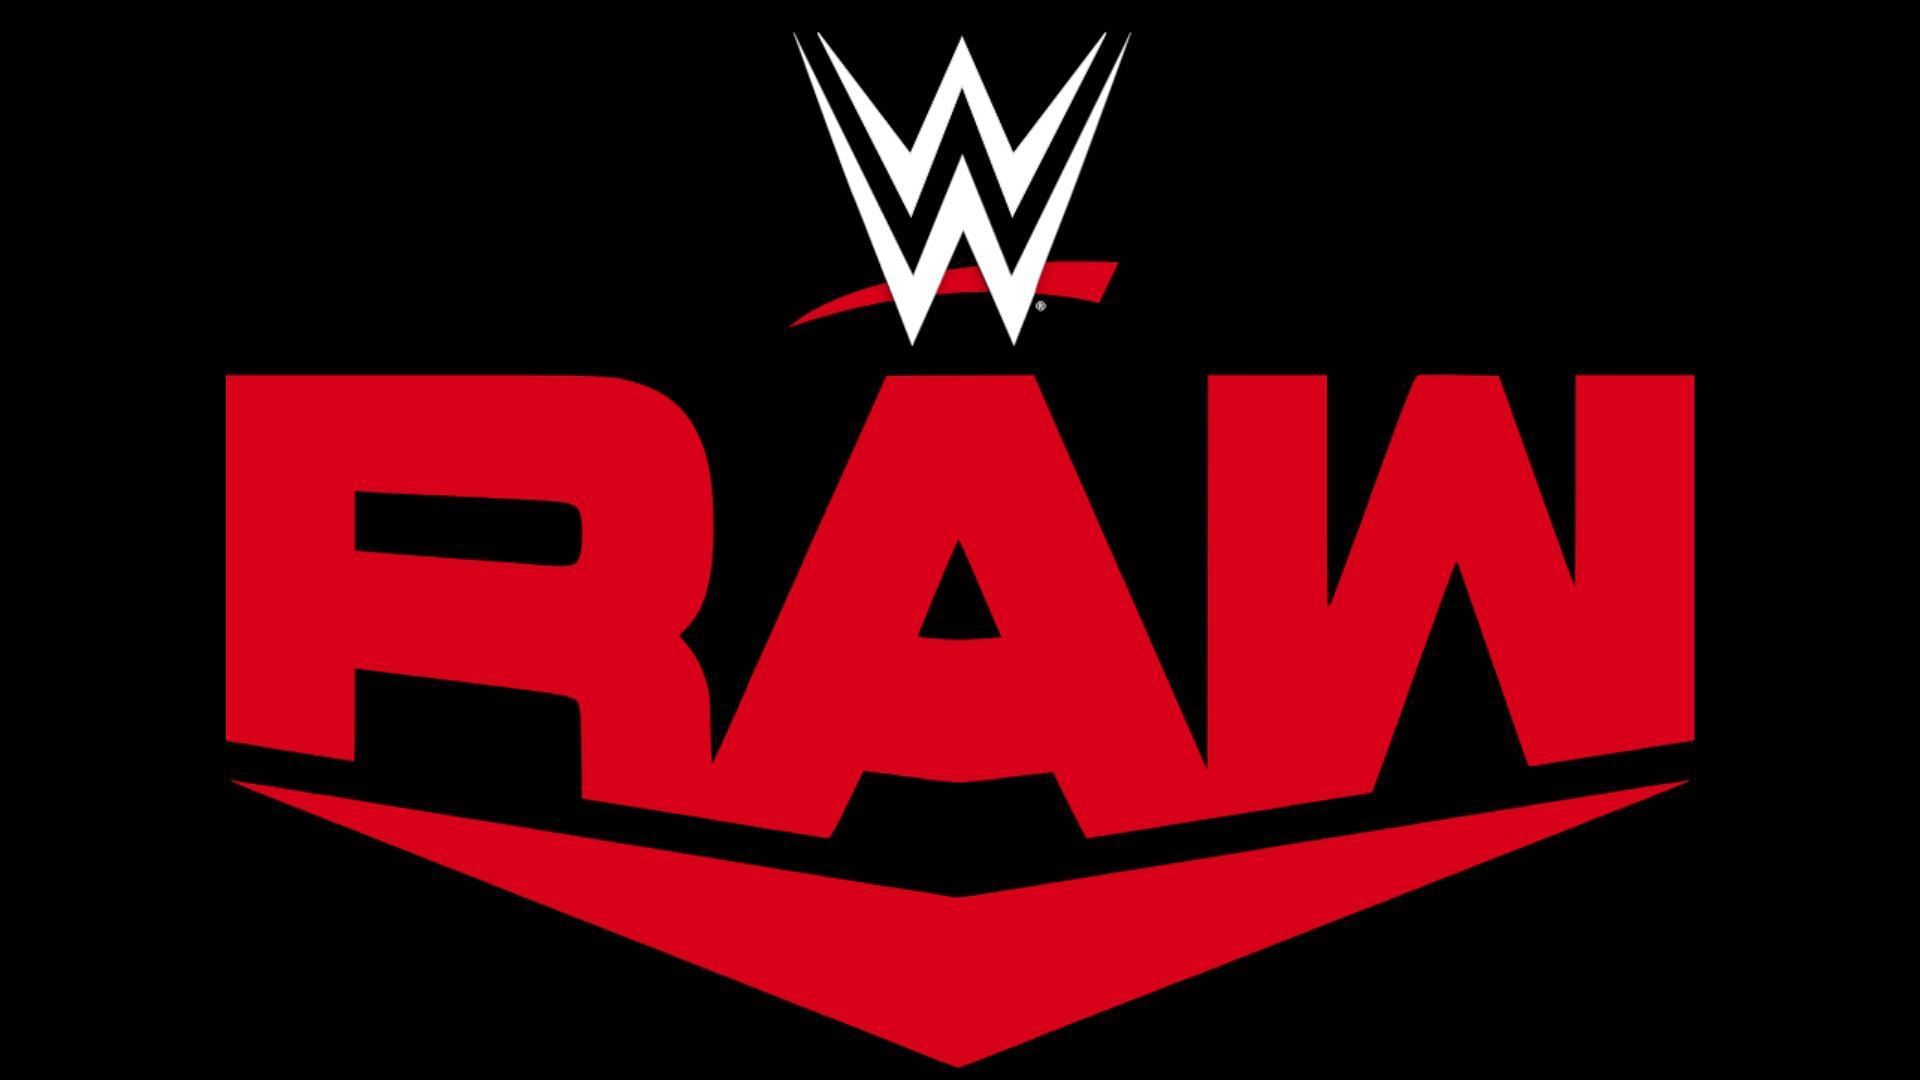 Former WWE Champion and his faction may be set to return to RAW tonight